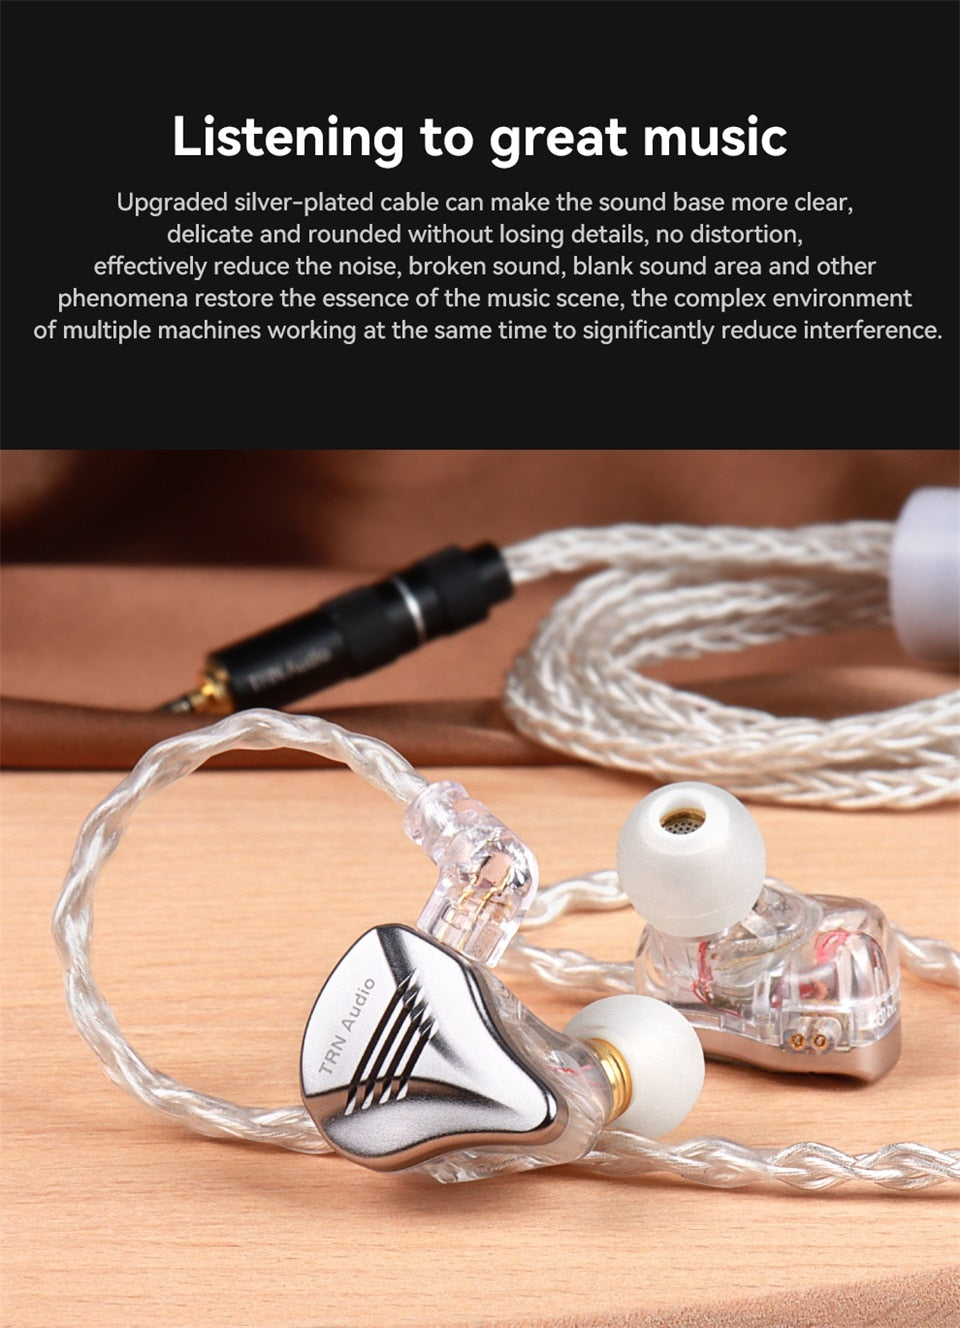 TRN TN Earphone Upgrade Cable - 8 Core Silver Plated